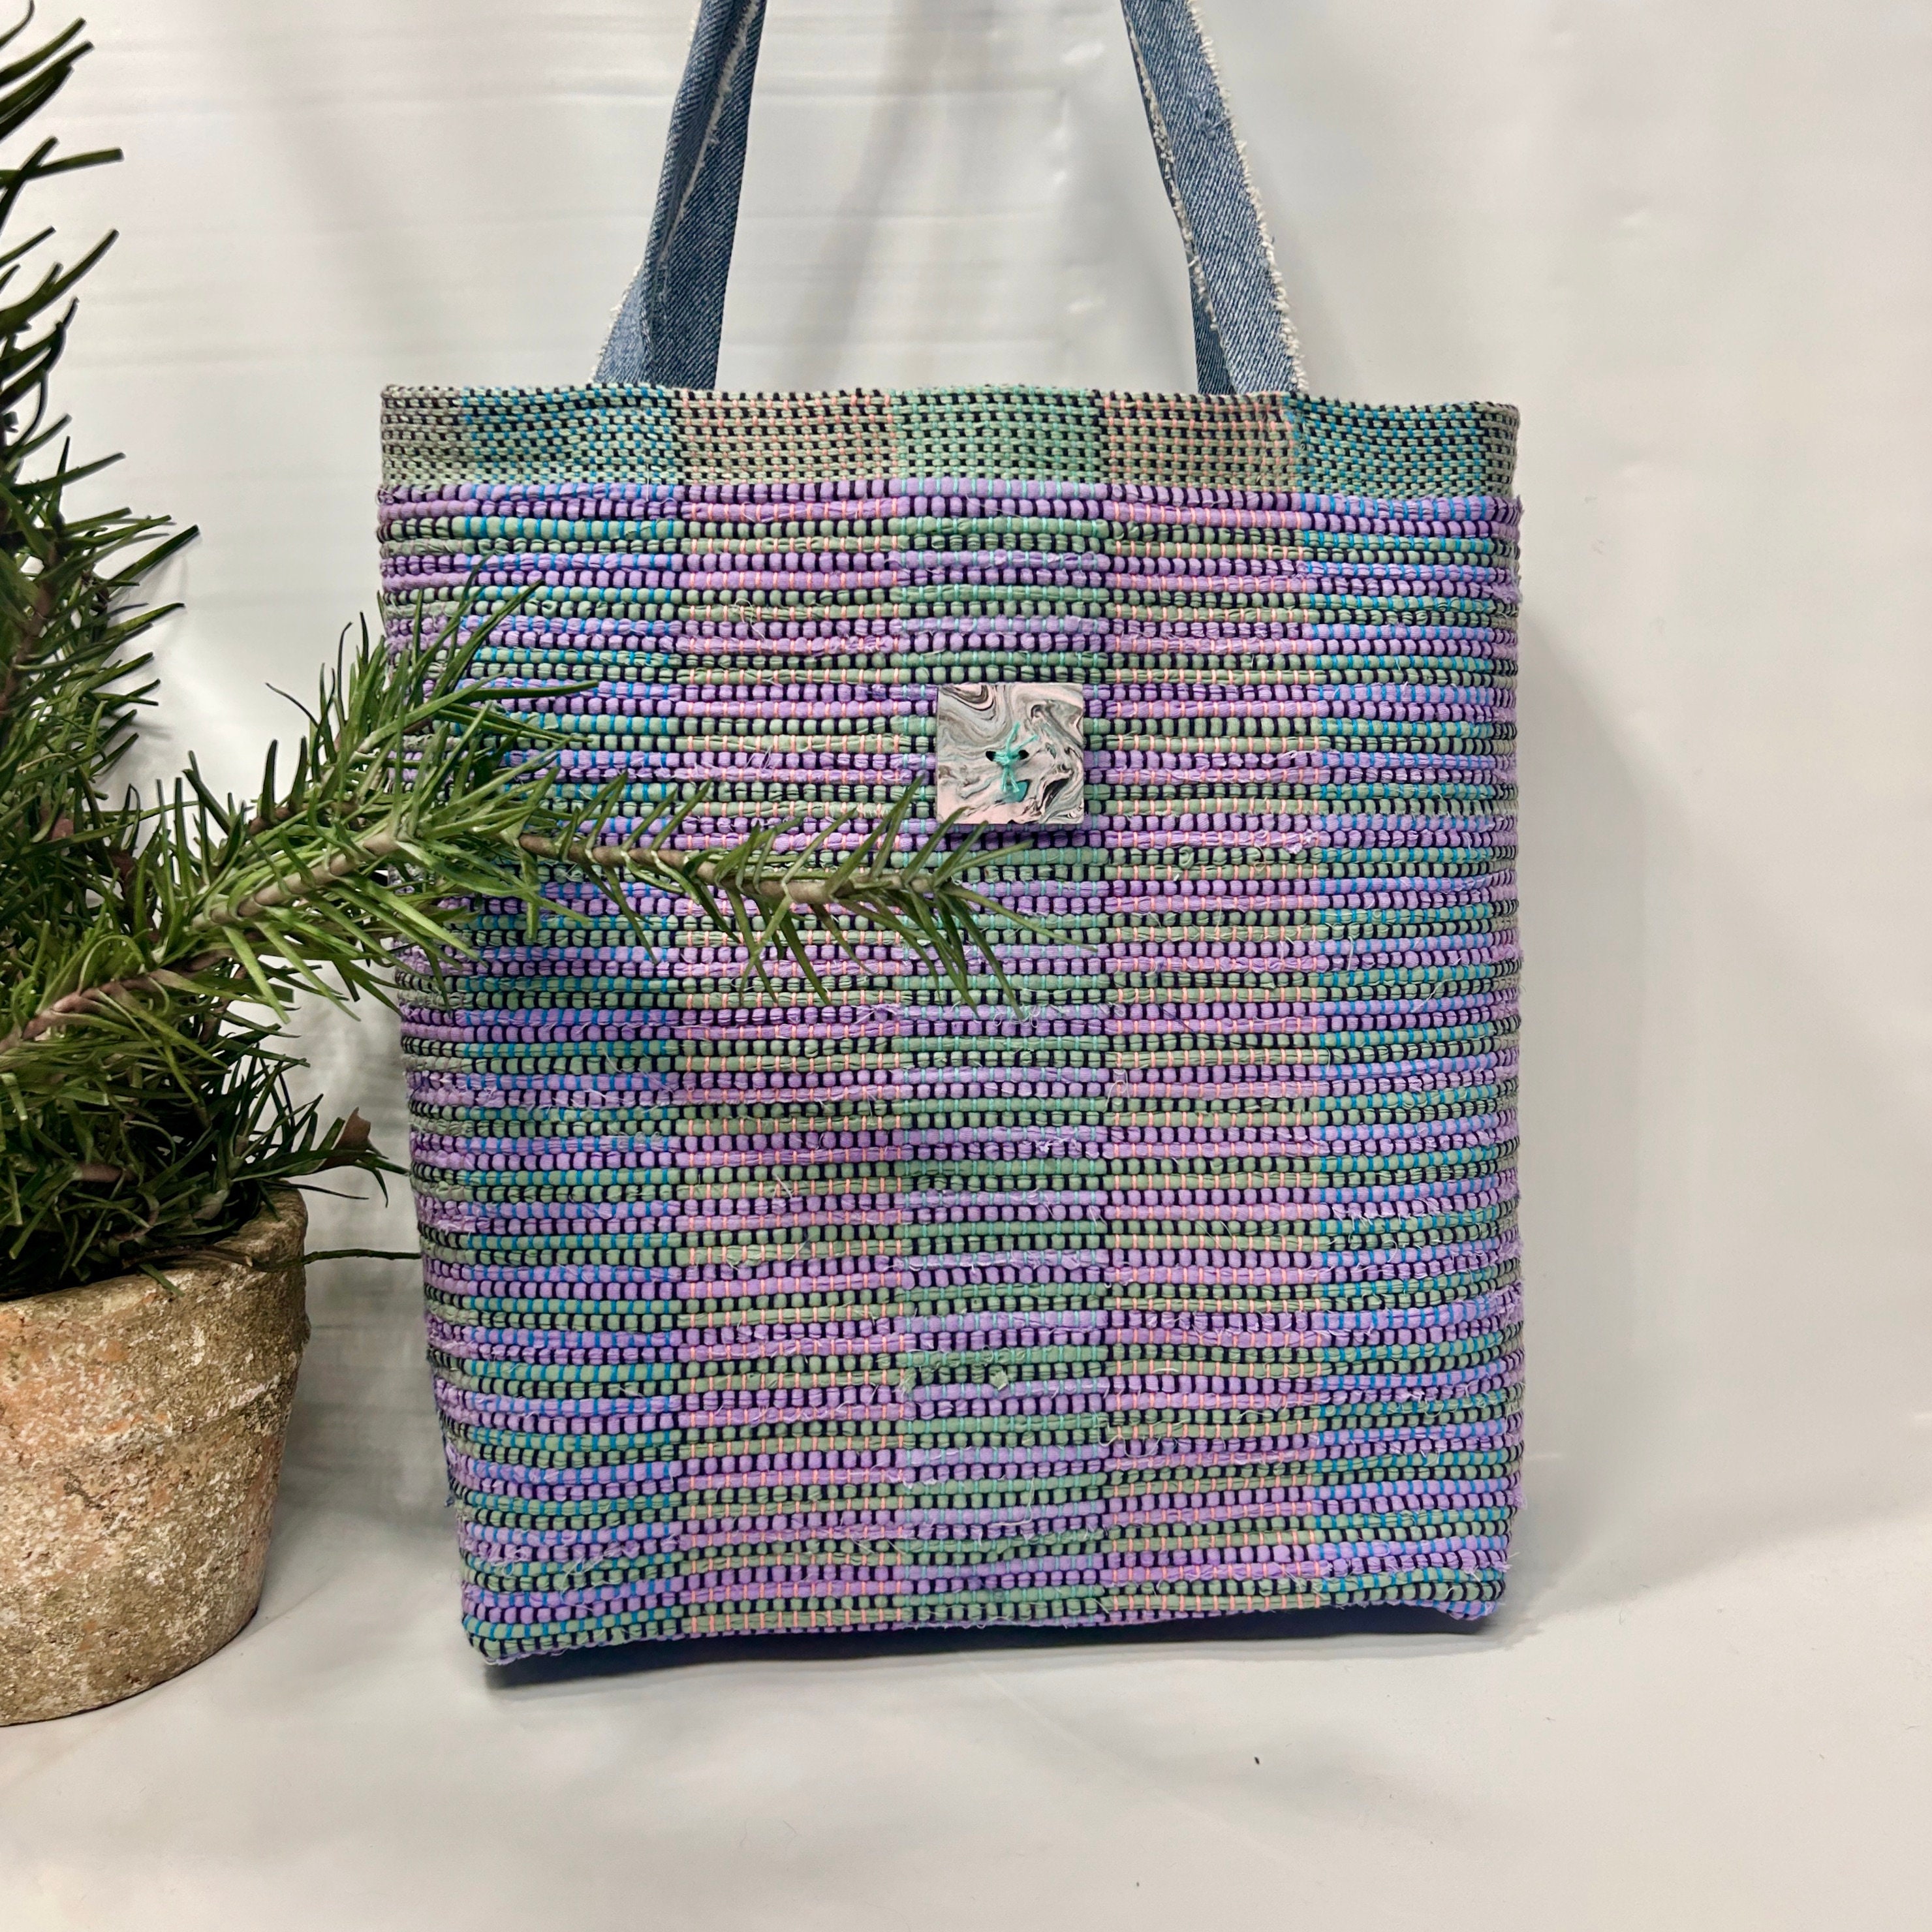 Neoprene Woven Tote Bag Mint color Large Size Set 40% off! Free Ship!